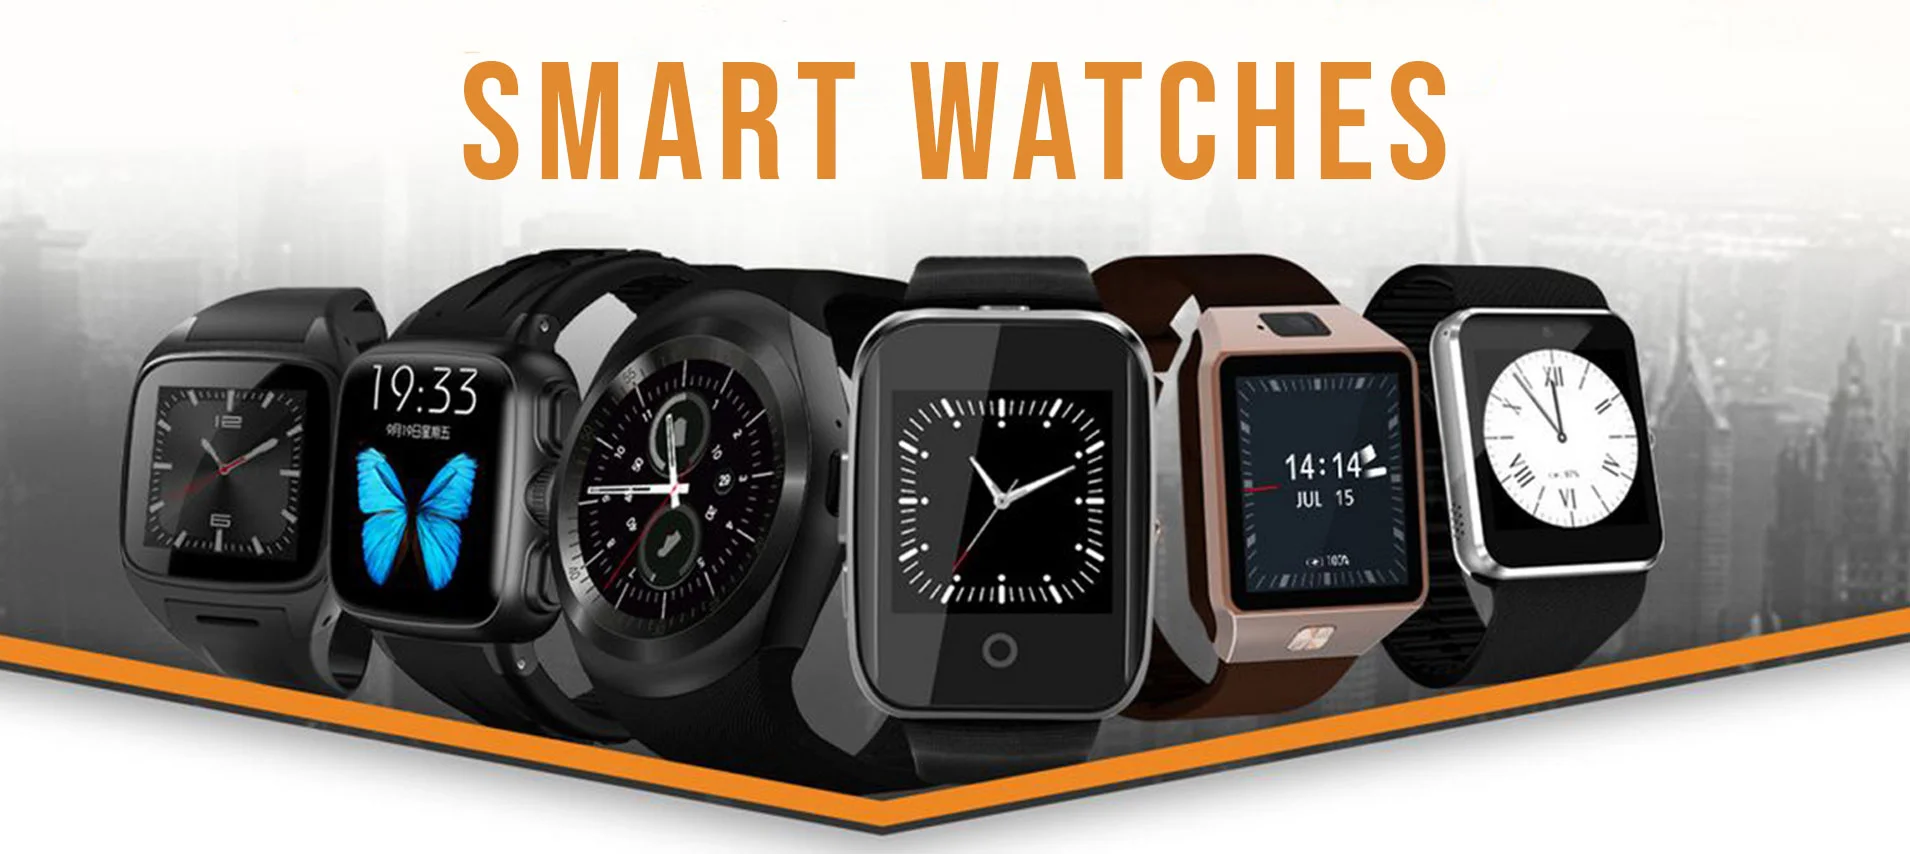 Other Branded Smart Watches